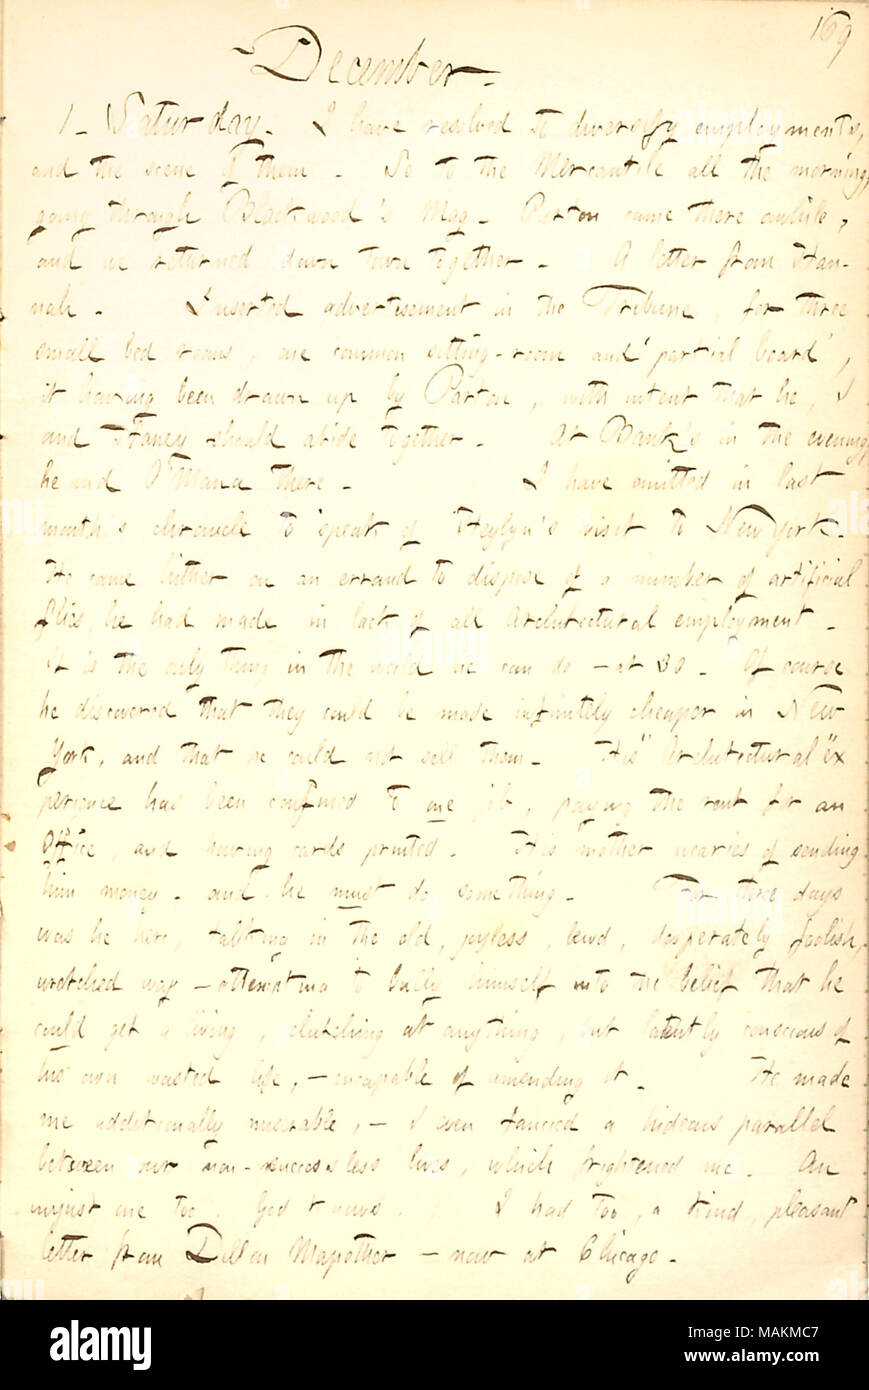 Describes a visit of Edward Heylyn to New York to try to sell artificial flies he made.  Transcription: December. 1. Saturday. I have resolved to diversify employments, and the scene of them. So to the Mercantile all the morning, going through Blackwood ?s Mag. [James] Parton came there awhile, and we returned down town together. A letter from Hannah [Bennett]. Inserted advertisement in the Tribune, for three small bed rooms, one common sitting-room and partial board, it having been drawn up by Parton, with intent that he, I and [Jesse] Haney should abide together. At [A.F.] Bank ?s in the eve Stock Photo